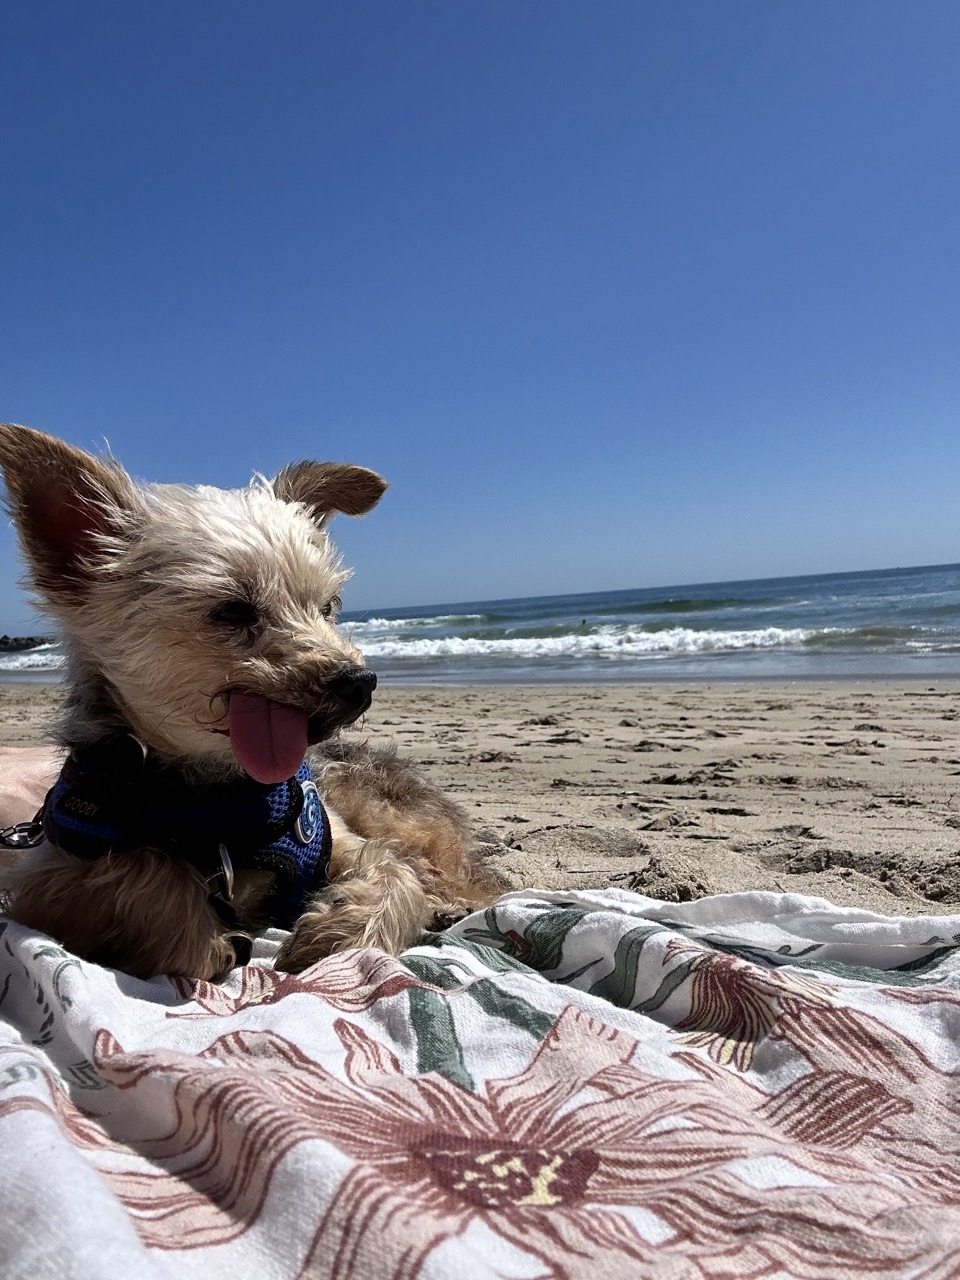 A yorkie with his tongue sticking out on the beach